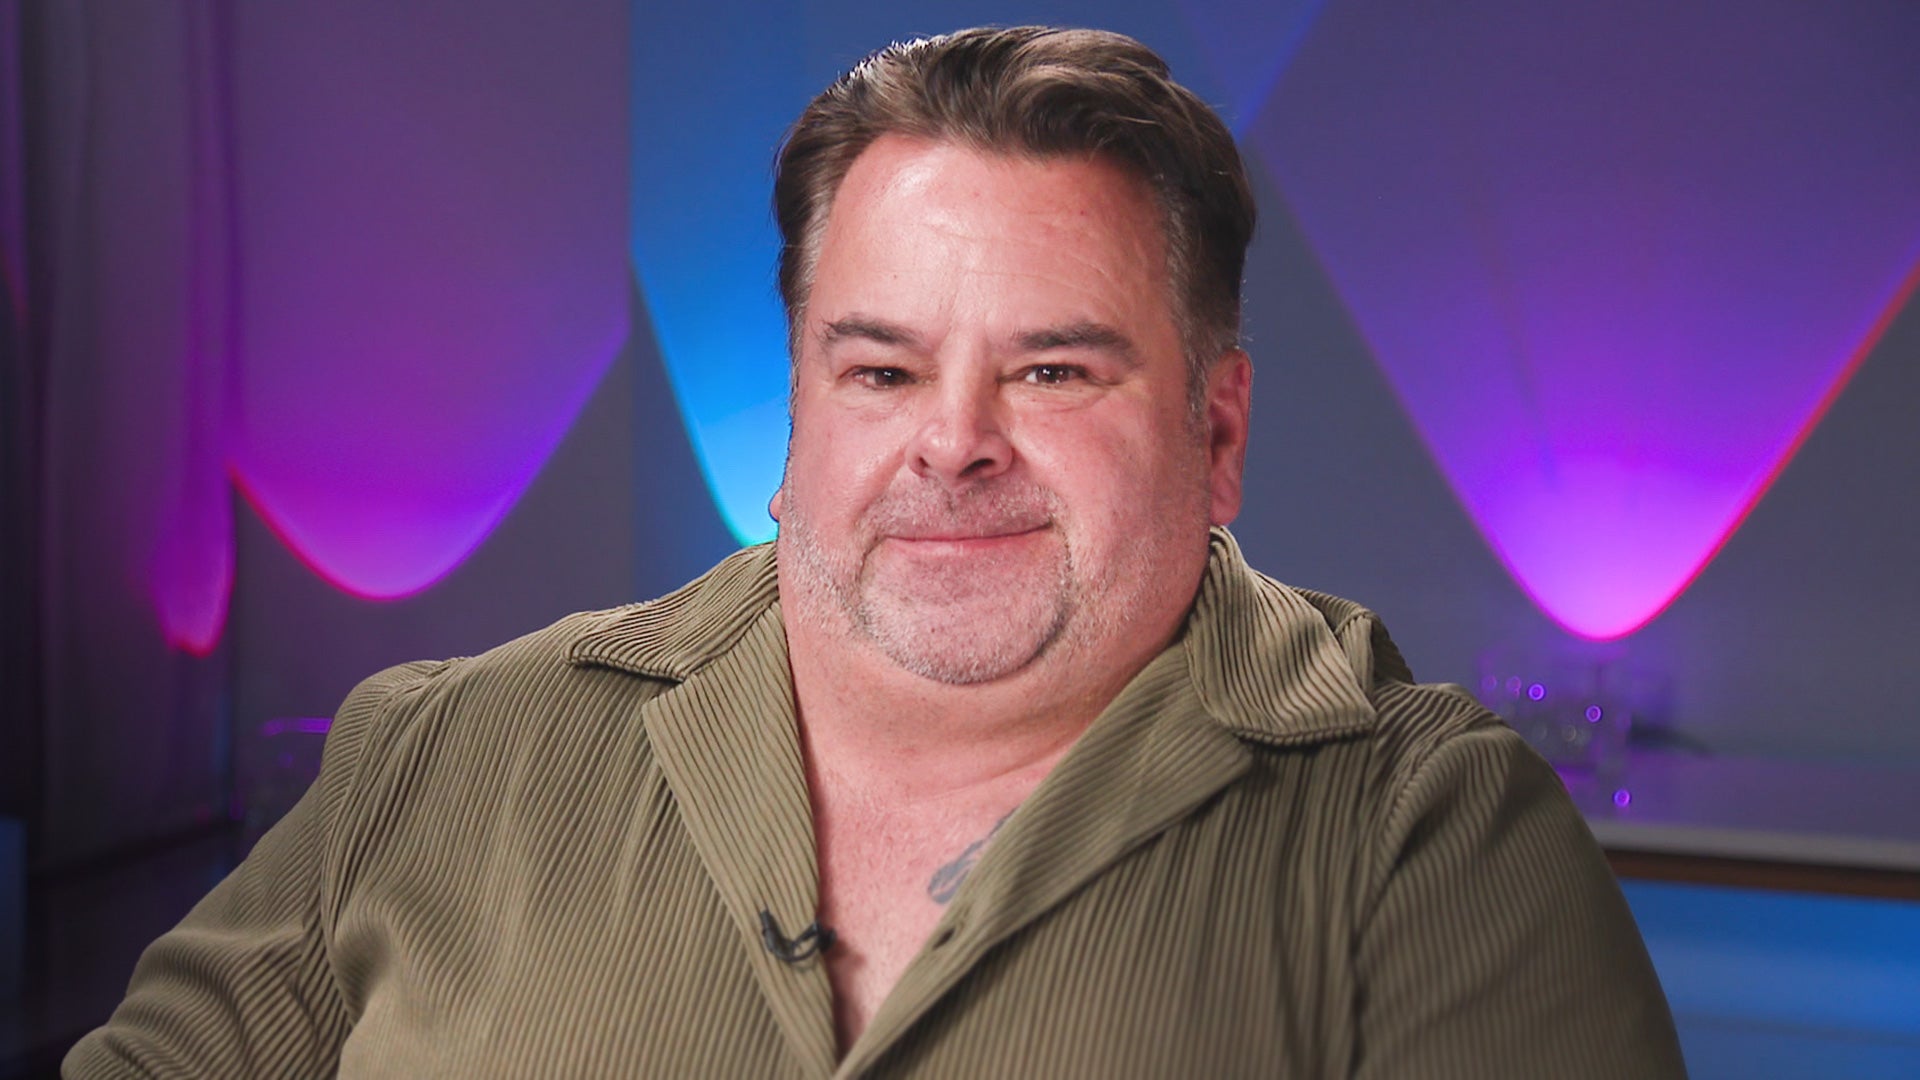 '90 Day Fiancé': Big Ed Says He Wants to Date a 'Conservative Christian Woman' Next 